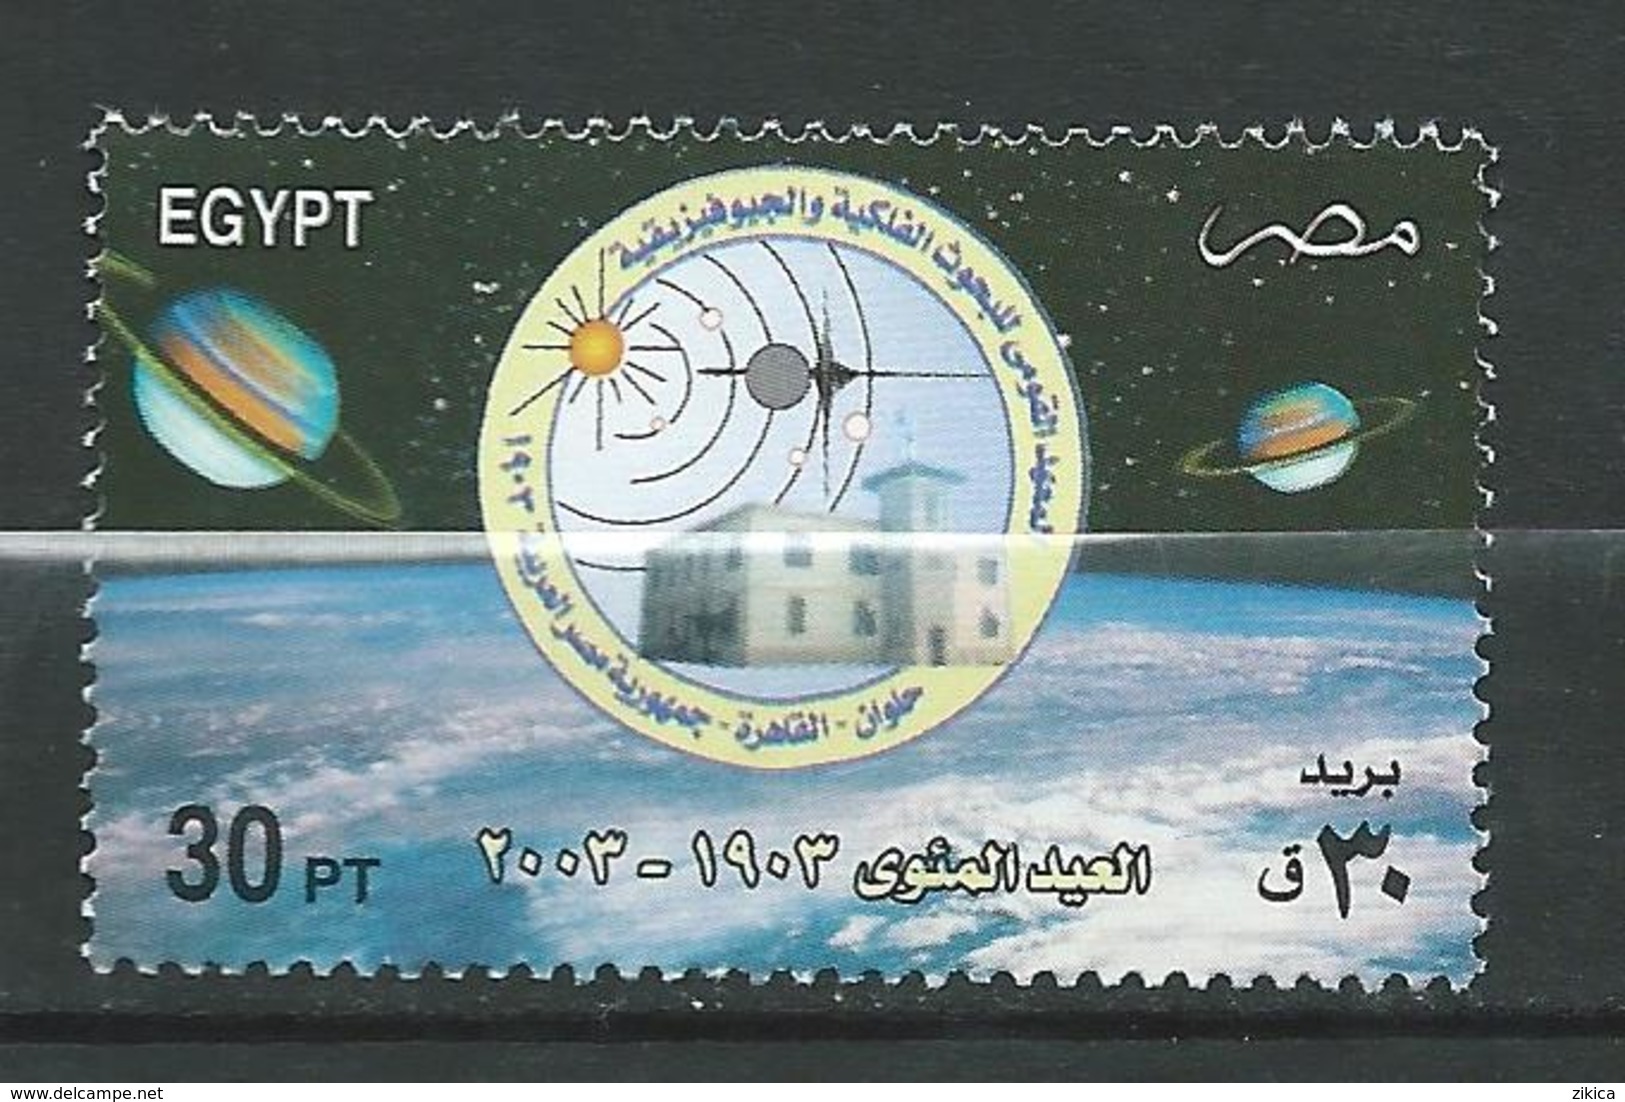 Egypt 2003 The 100th Anniversary Of National Institute For Astrological And Geophysical Research.Space.Astronomy. MNH - Ongebruikt